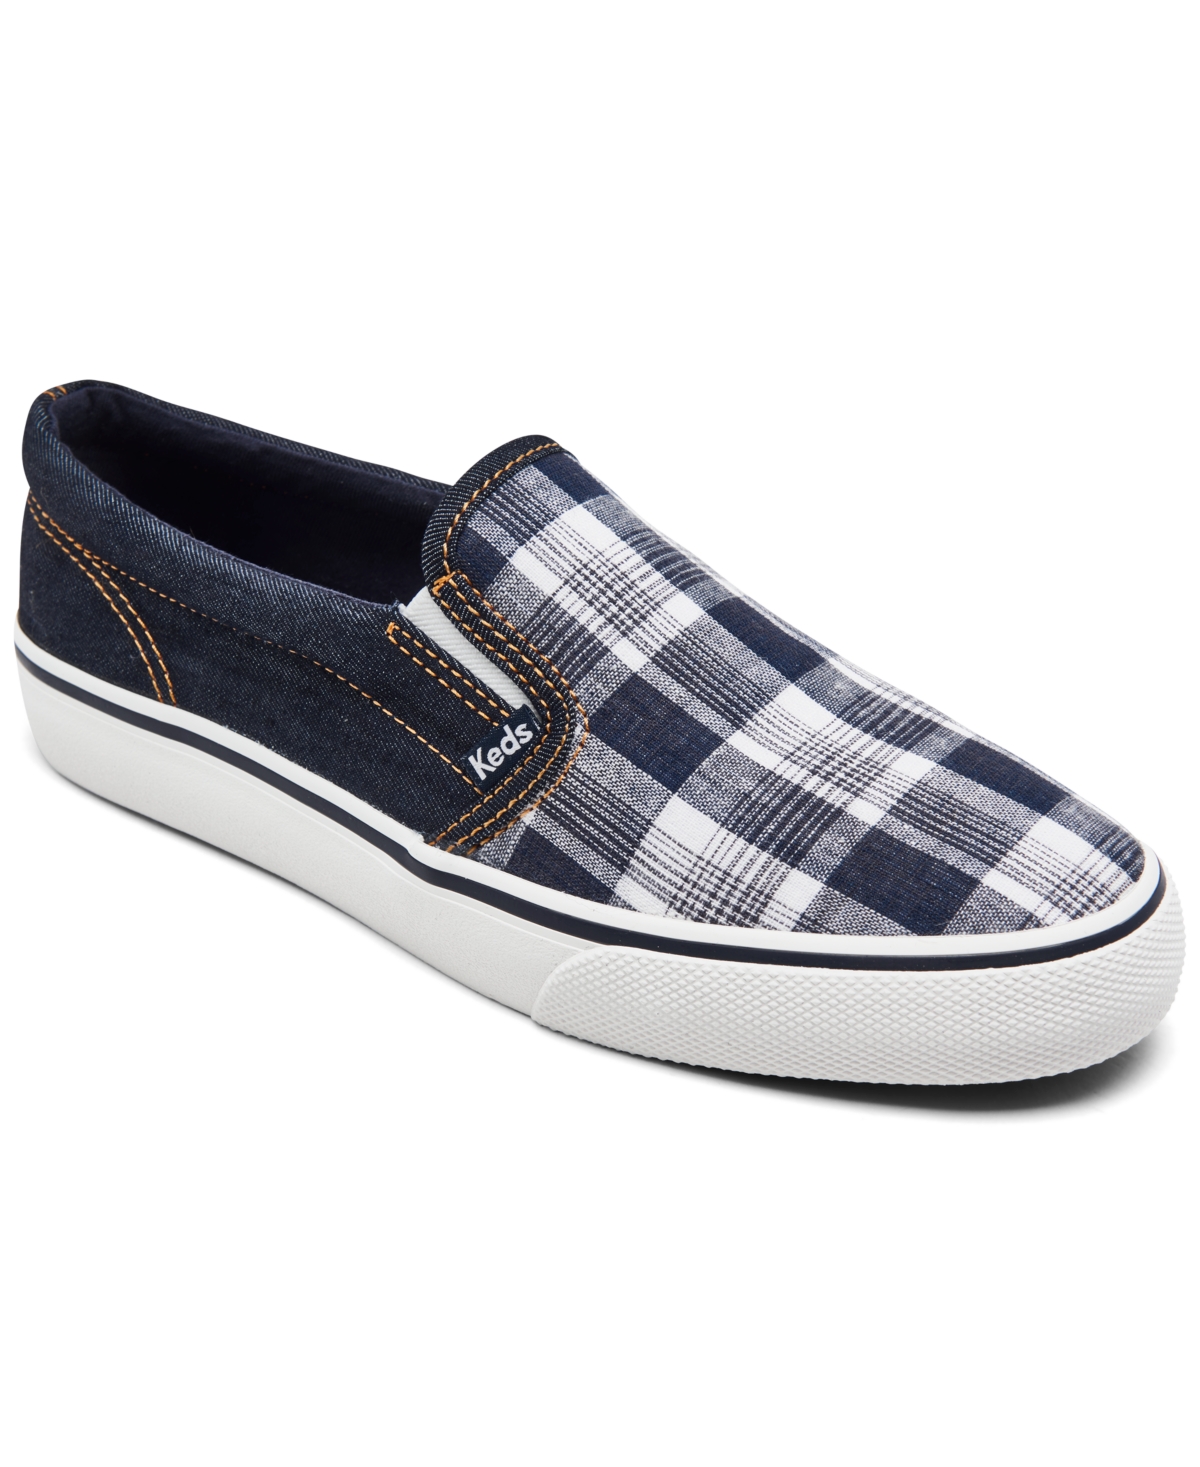 UPC 195018114808 product image for Keds Women's Jump Kick Slip-On Canvas Casual Sneakers from Finish Line | upcitemdb.com